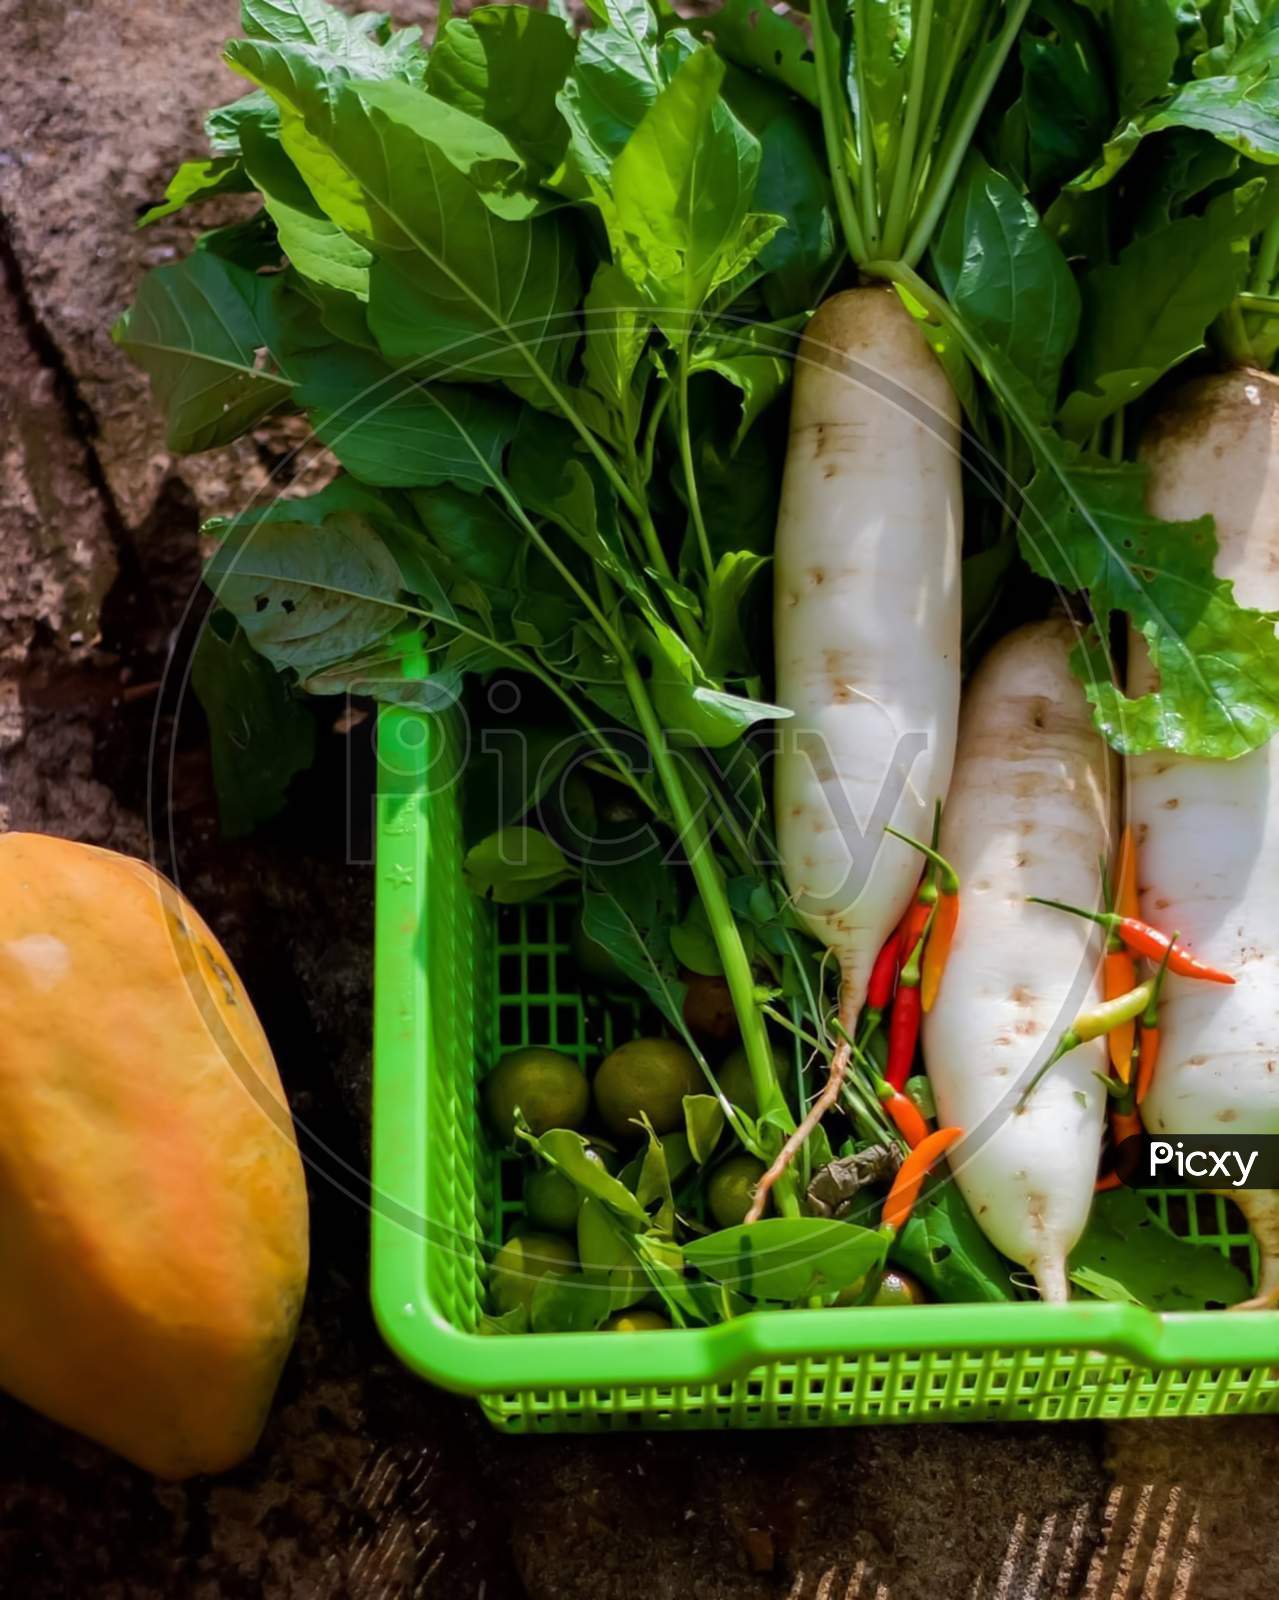 White Radish Is Compared As Ginseng In Vegetable Family In Chinese Traditional Medicine. It Can Promote Digestion And Prevent Food Retention. And There Is An Interesting Saying That White Radish Is The Best Food In Winter Just The Same As Ginger In Summer.